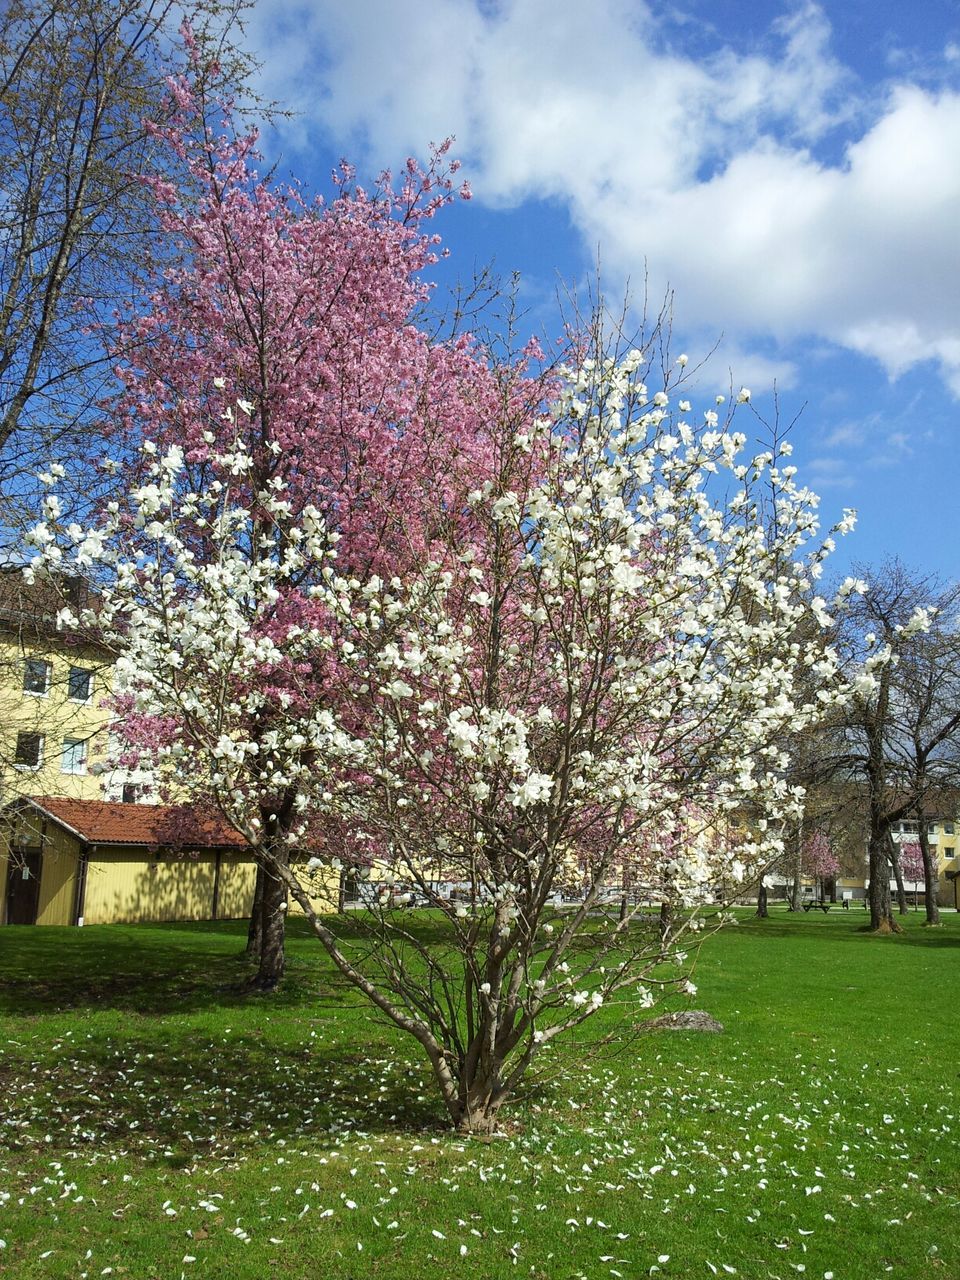 flower, tree, freshness, growth, sky, grass, beauty in nature, blossom, nature, fragility, branch, park - man made space, lawn, building exterior, springtime, built structure, green color, cherry tree, cherry blossom, in bloom